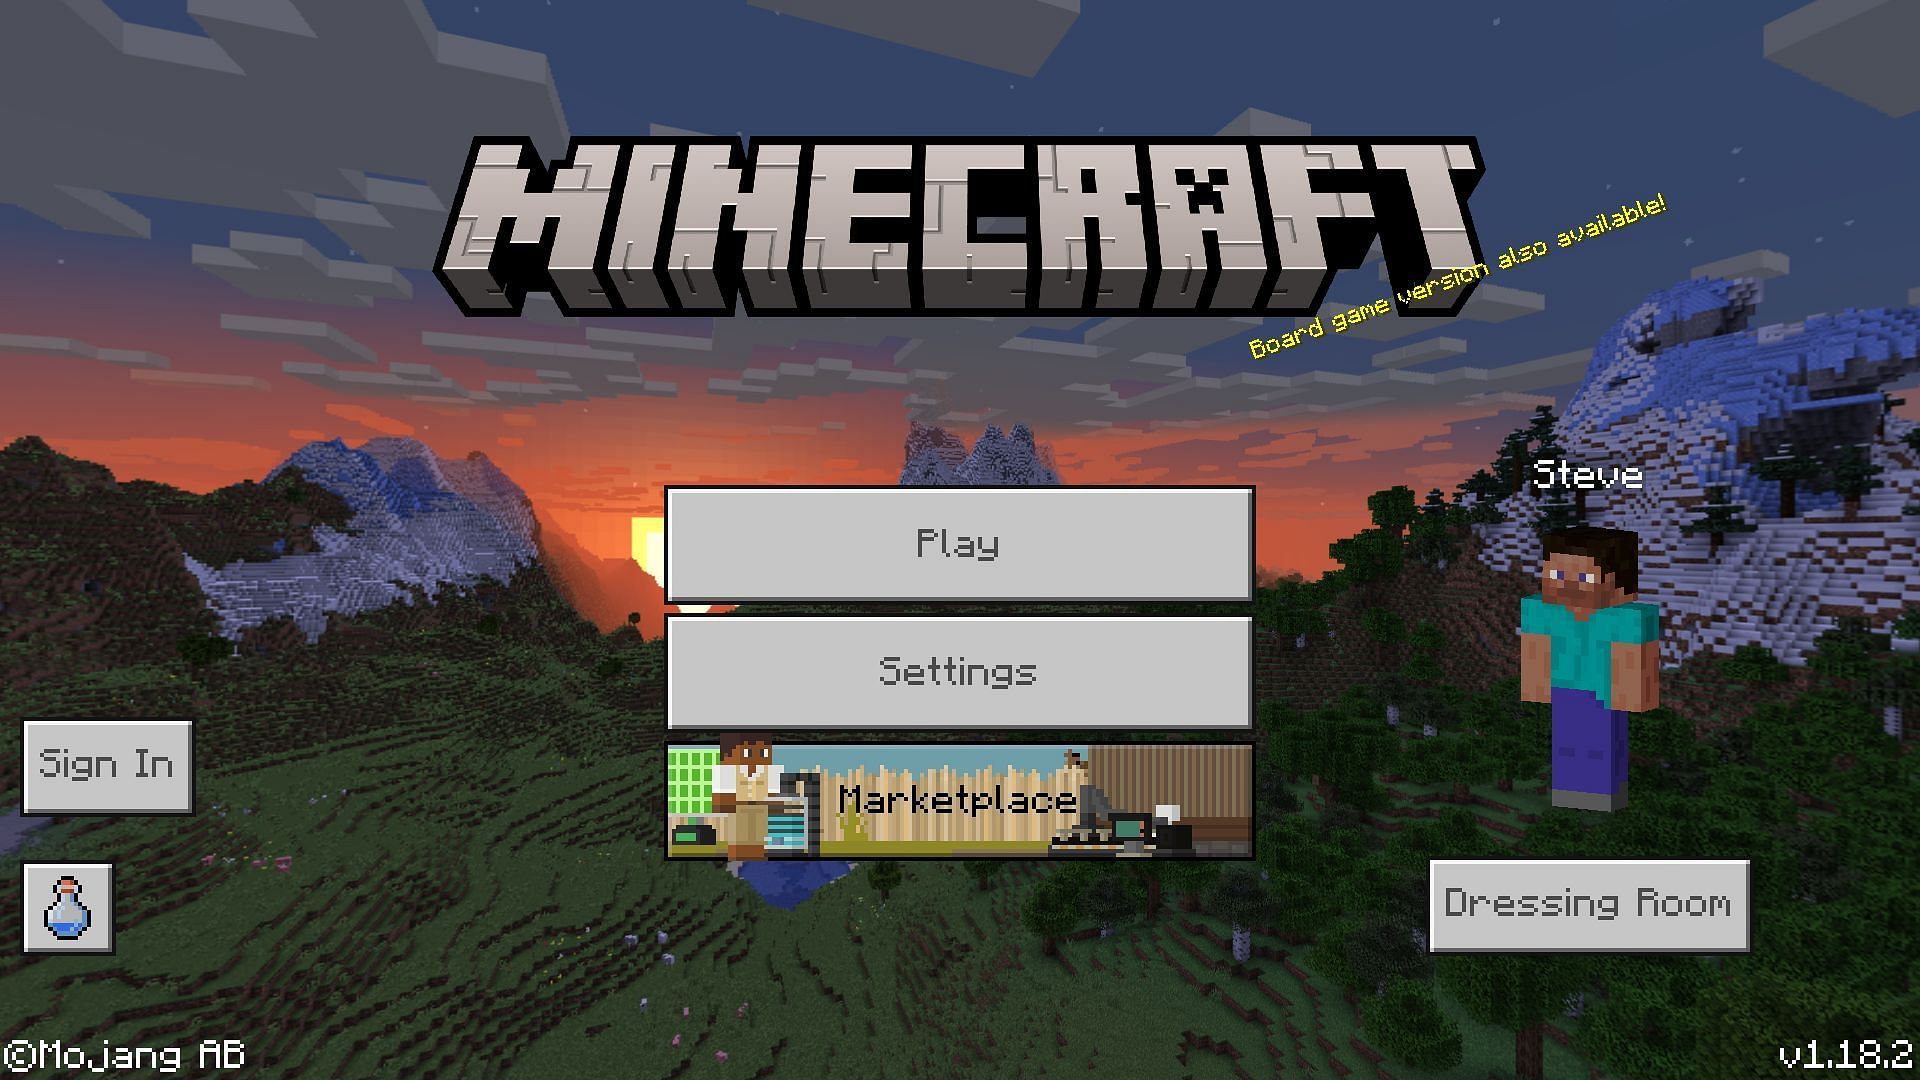 How long has Minecraft been out? Initial release date and platforms